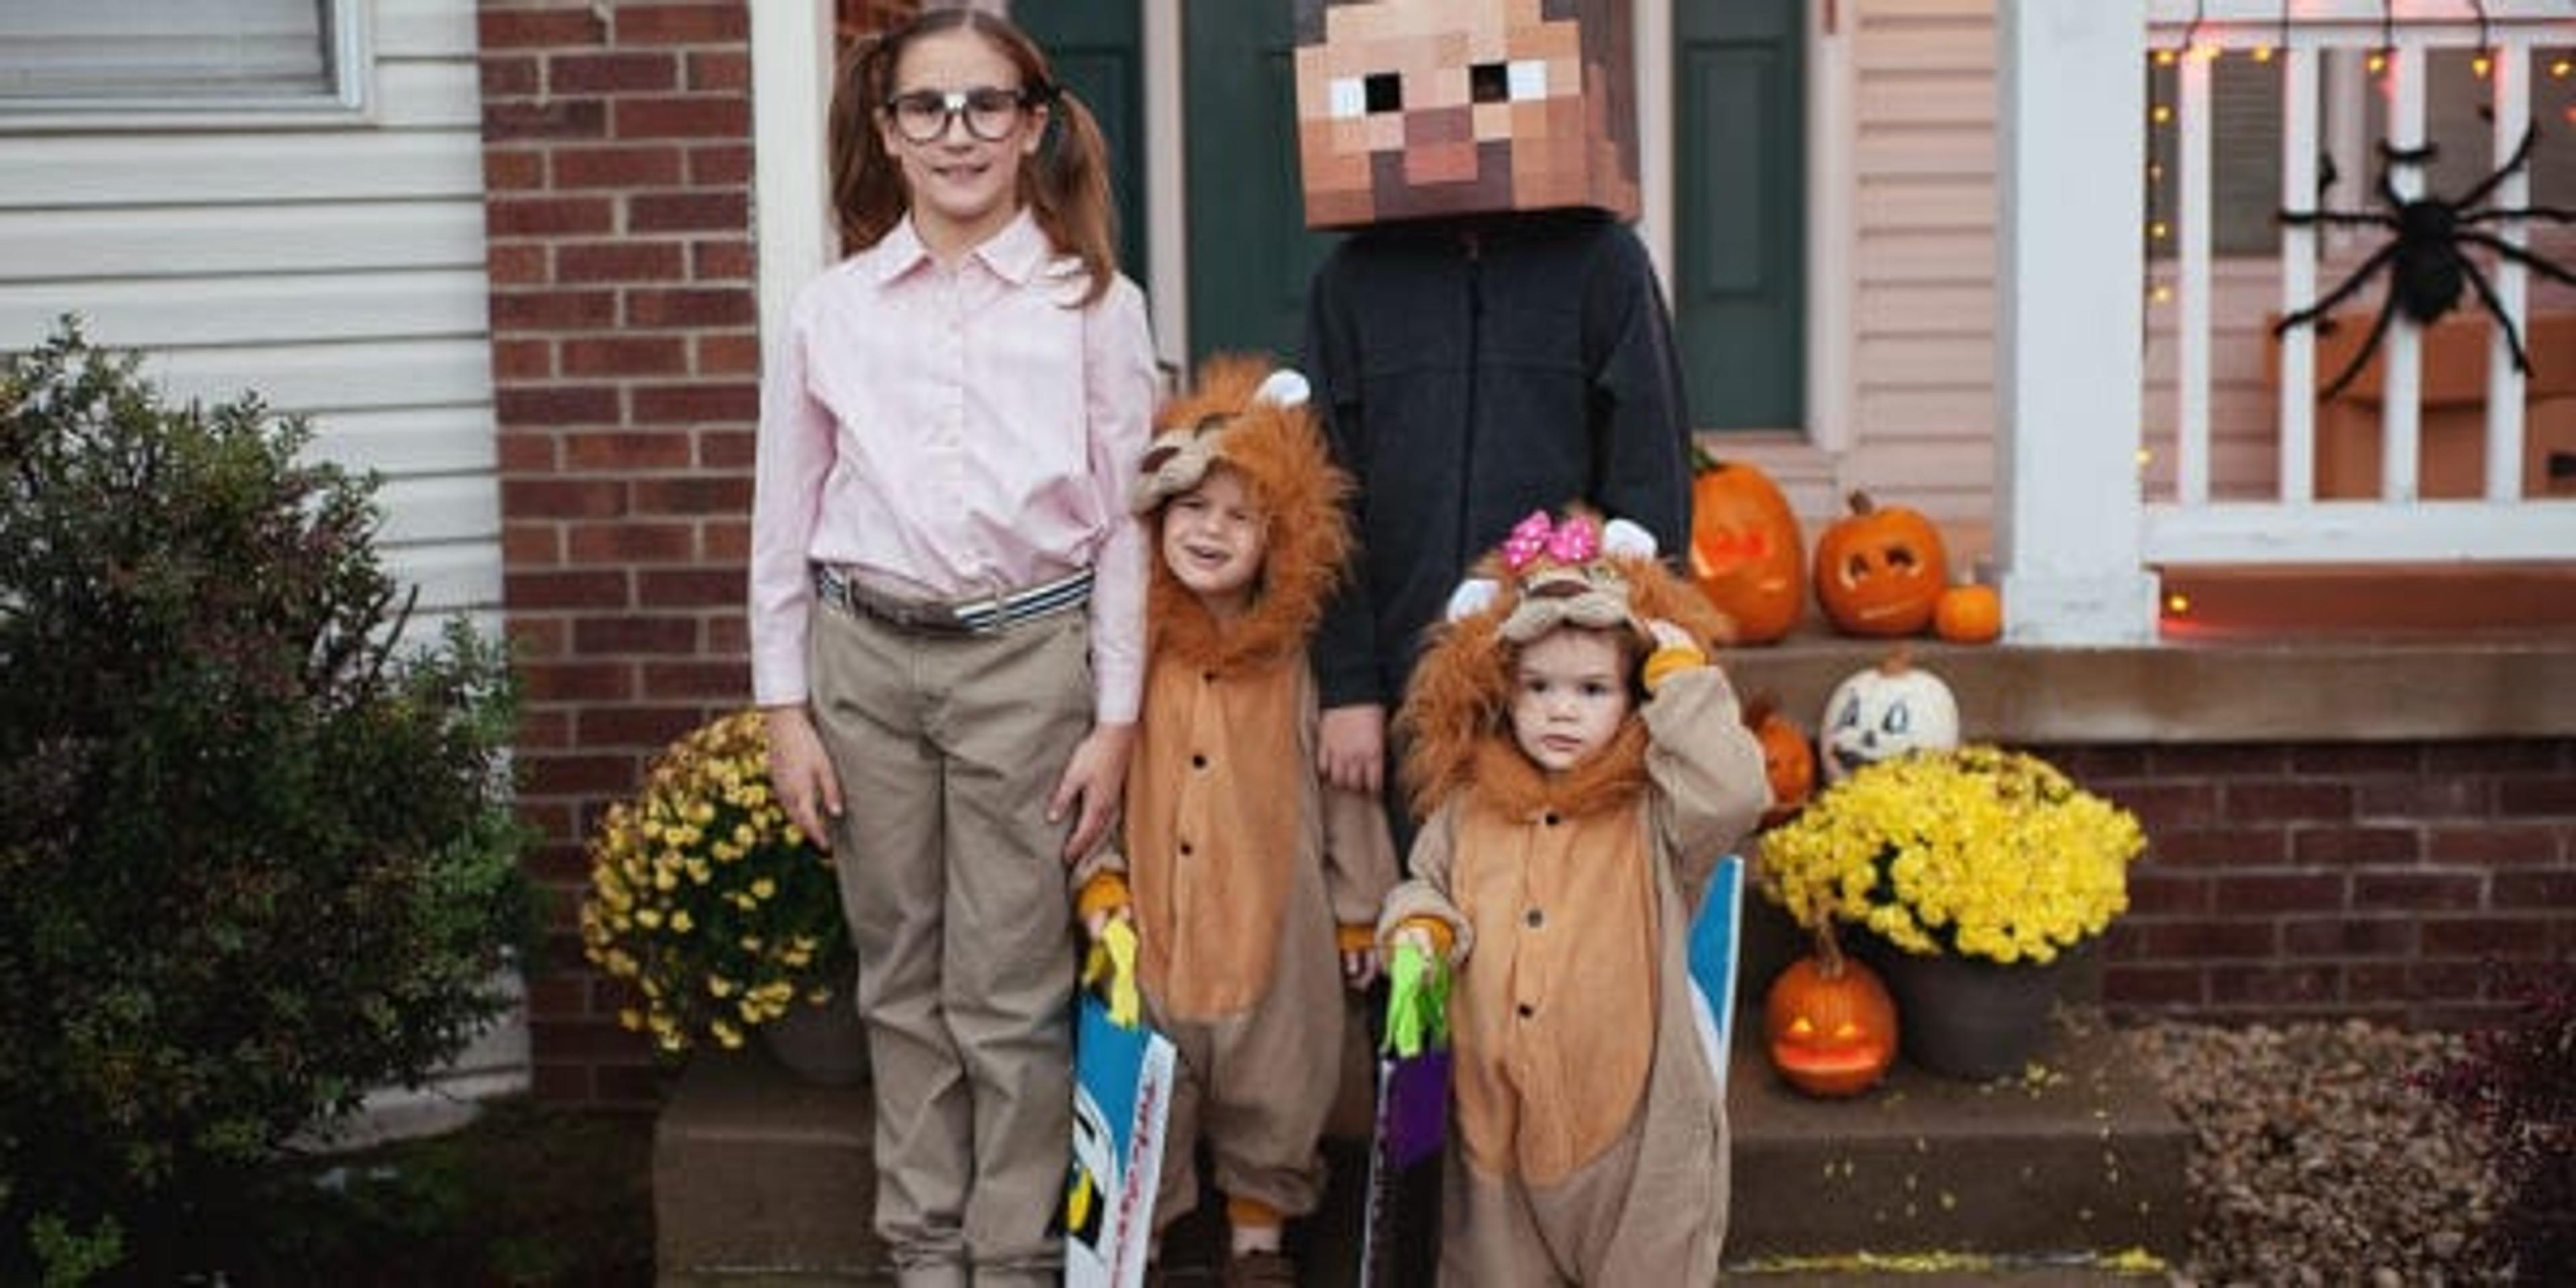 Image of four kids dressed up for Halloween.